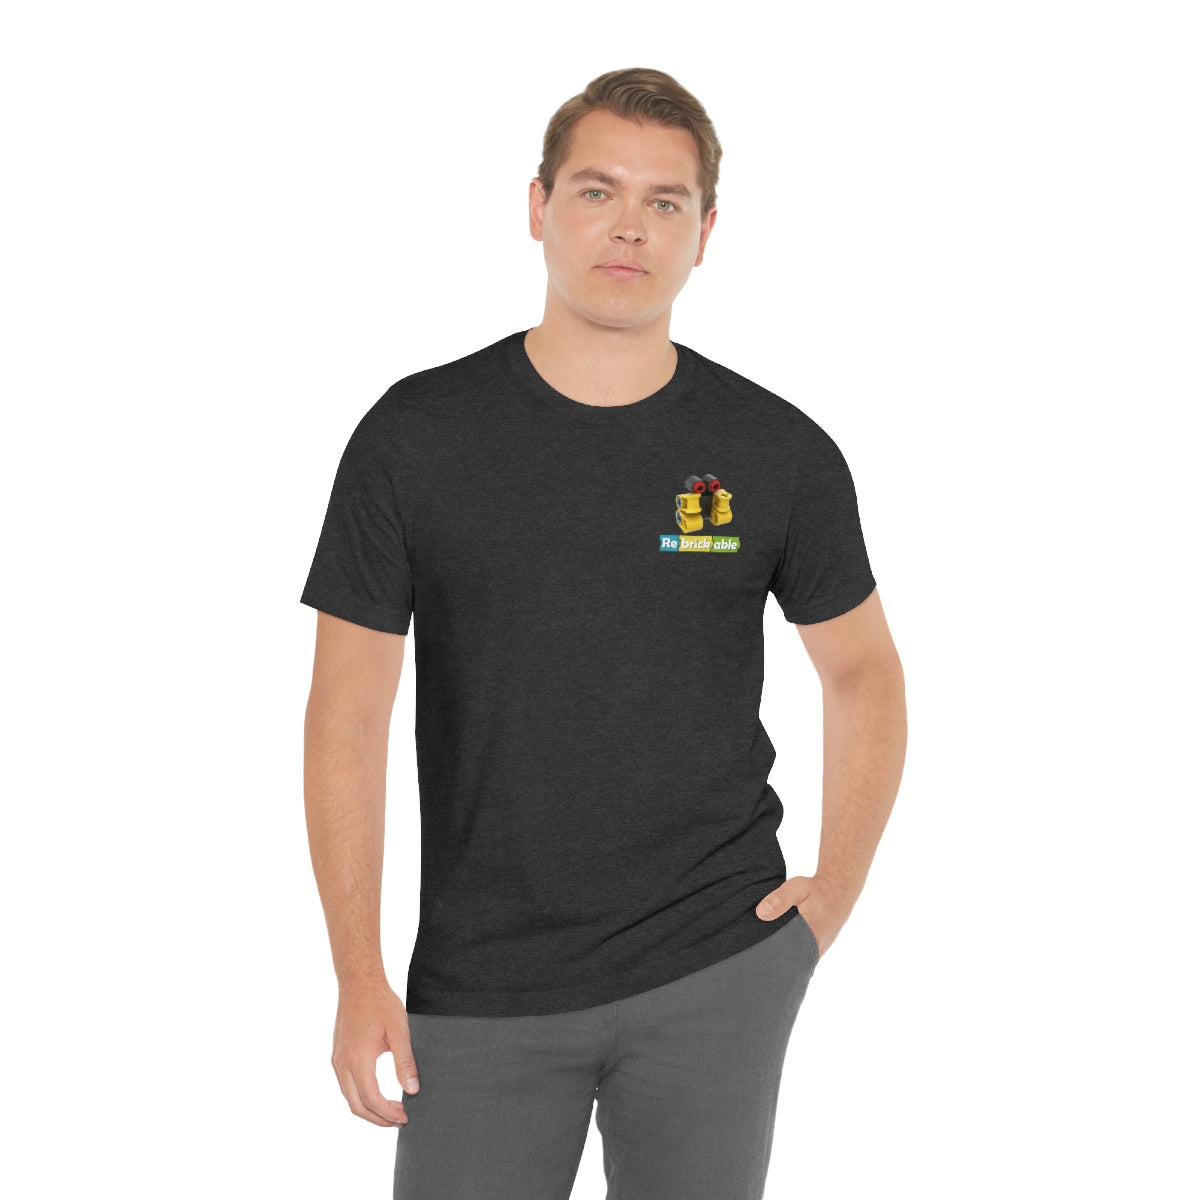 Unisex Jersey Short Sleeve Tee (small front logo, shipped from EU)